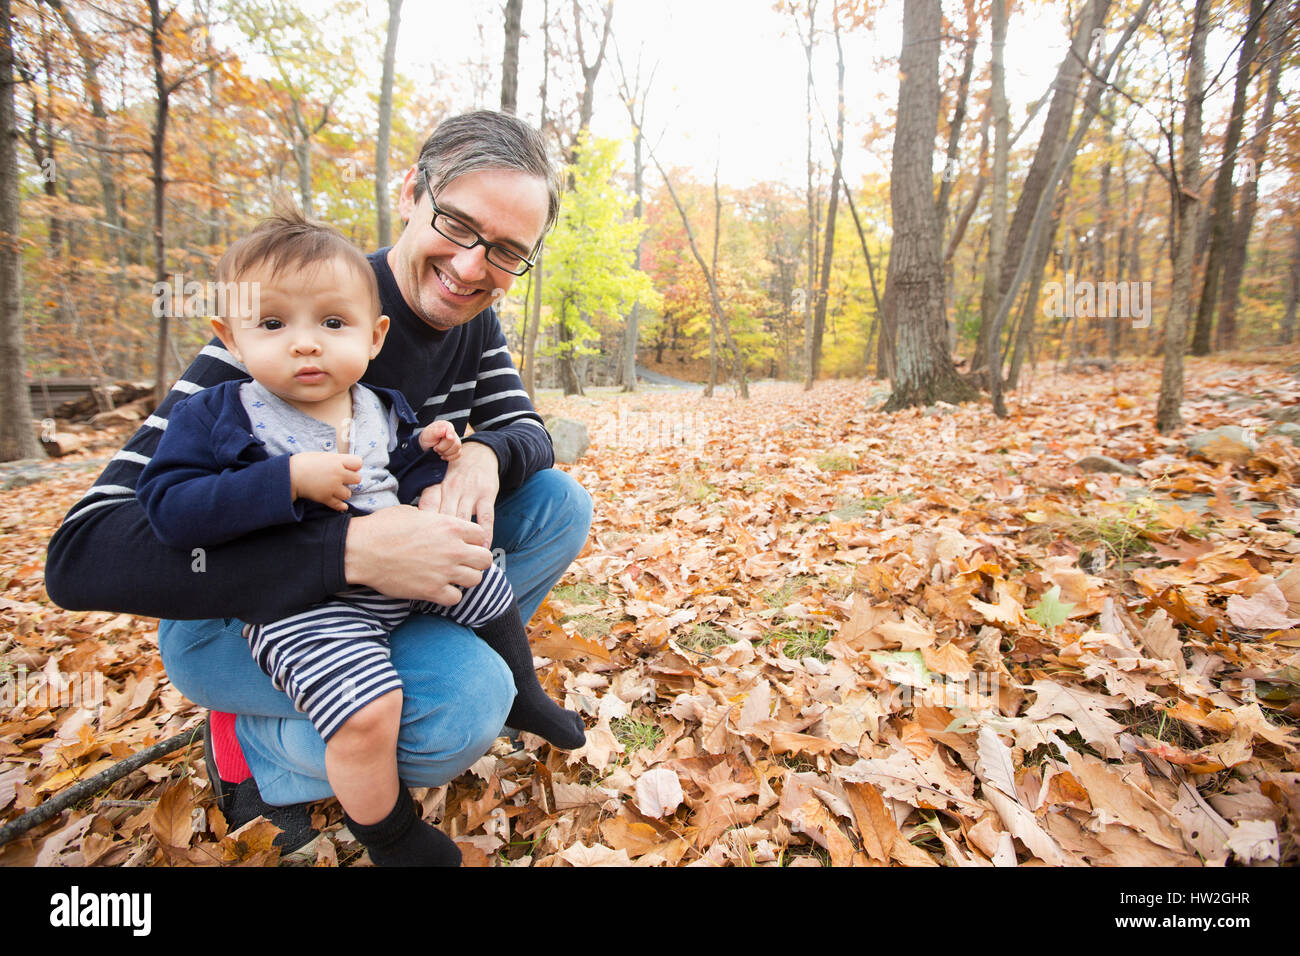 Father holding baby son outdoors in autumn Stock Photo